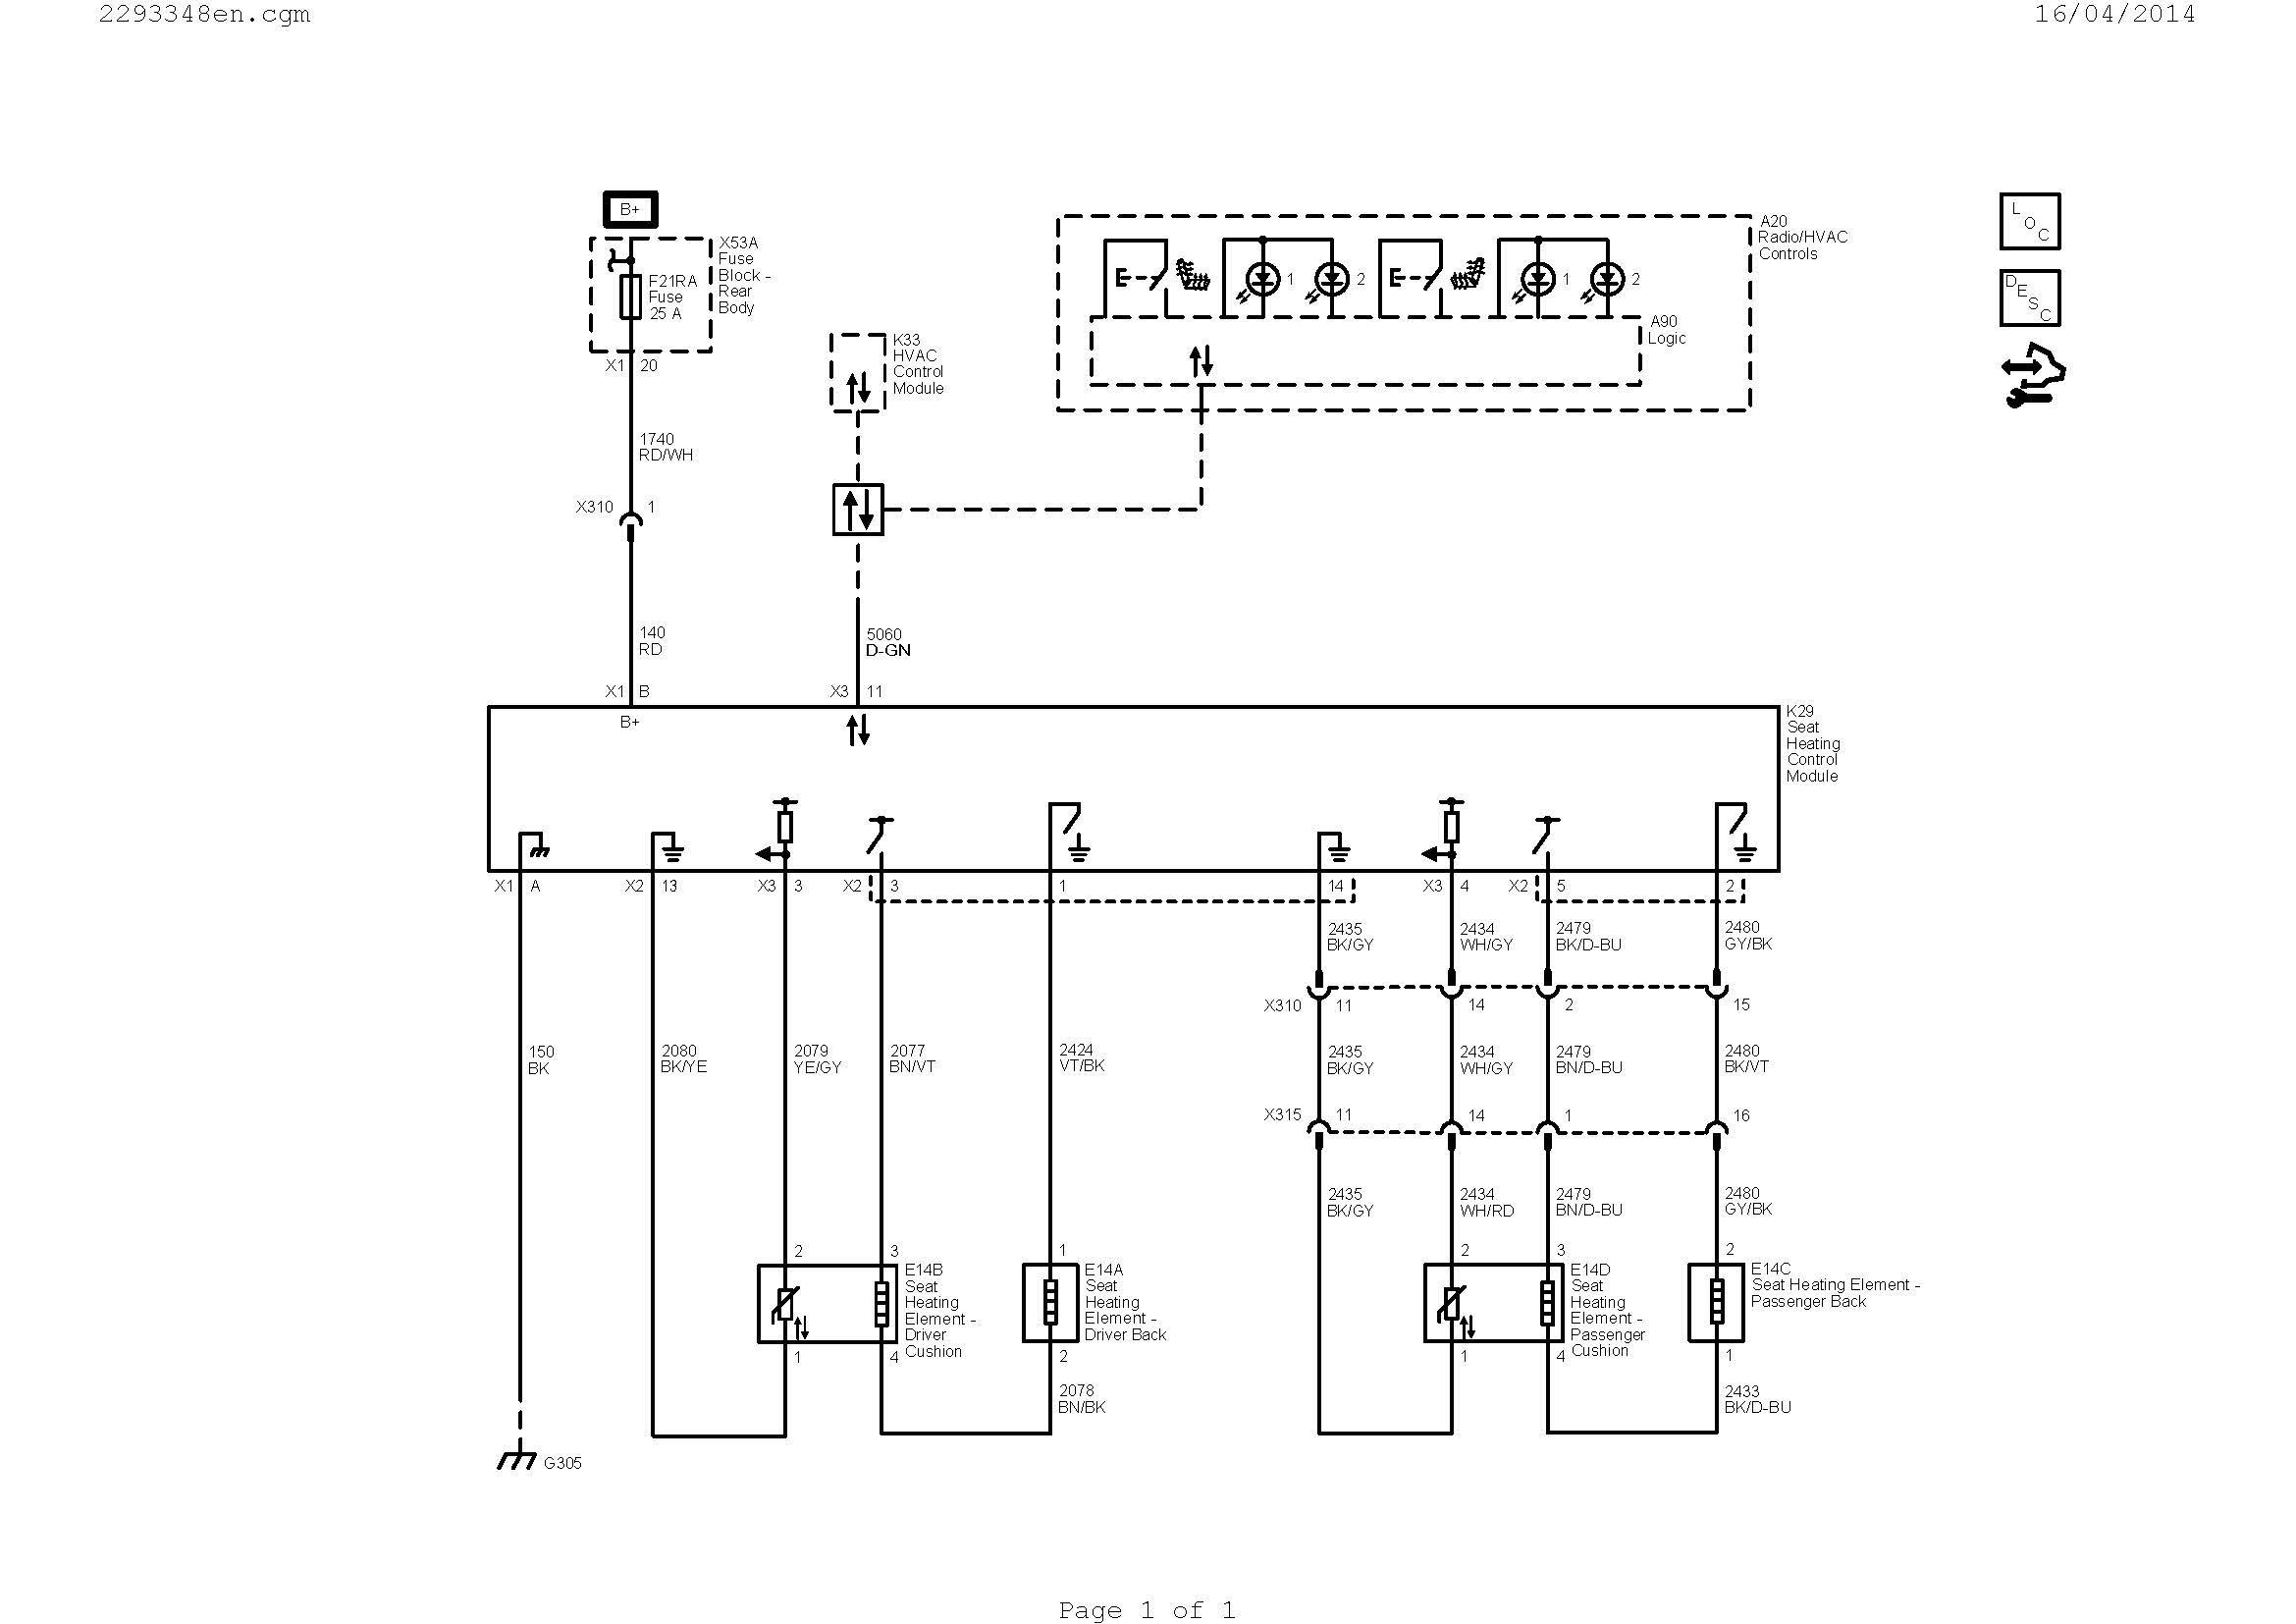 Dometic thermostat Wiring Diagram Dometic Ac Wiring Diagram Detailed Schematics Diagram